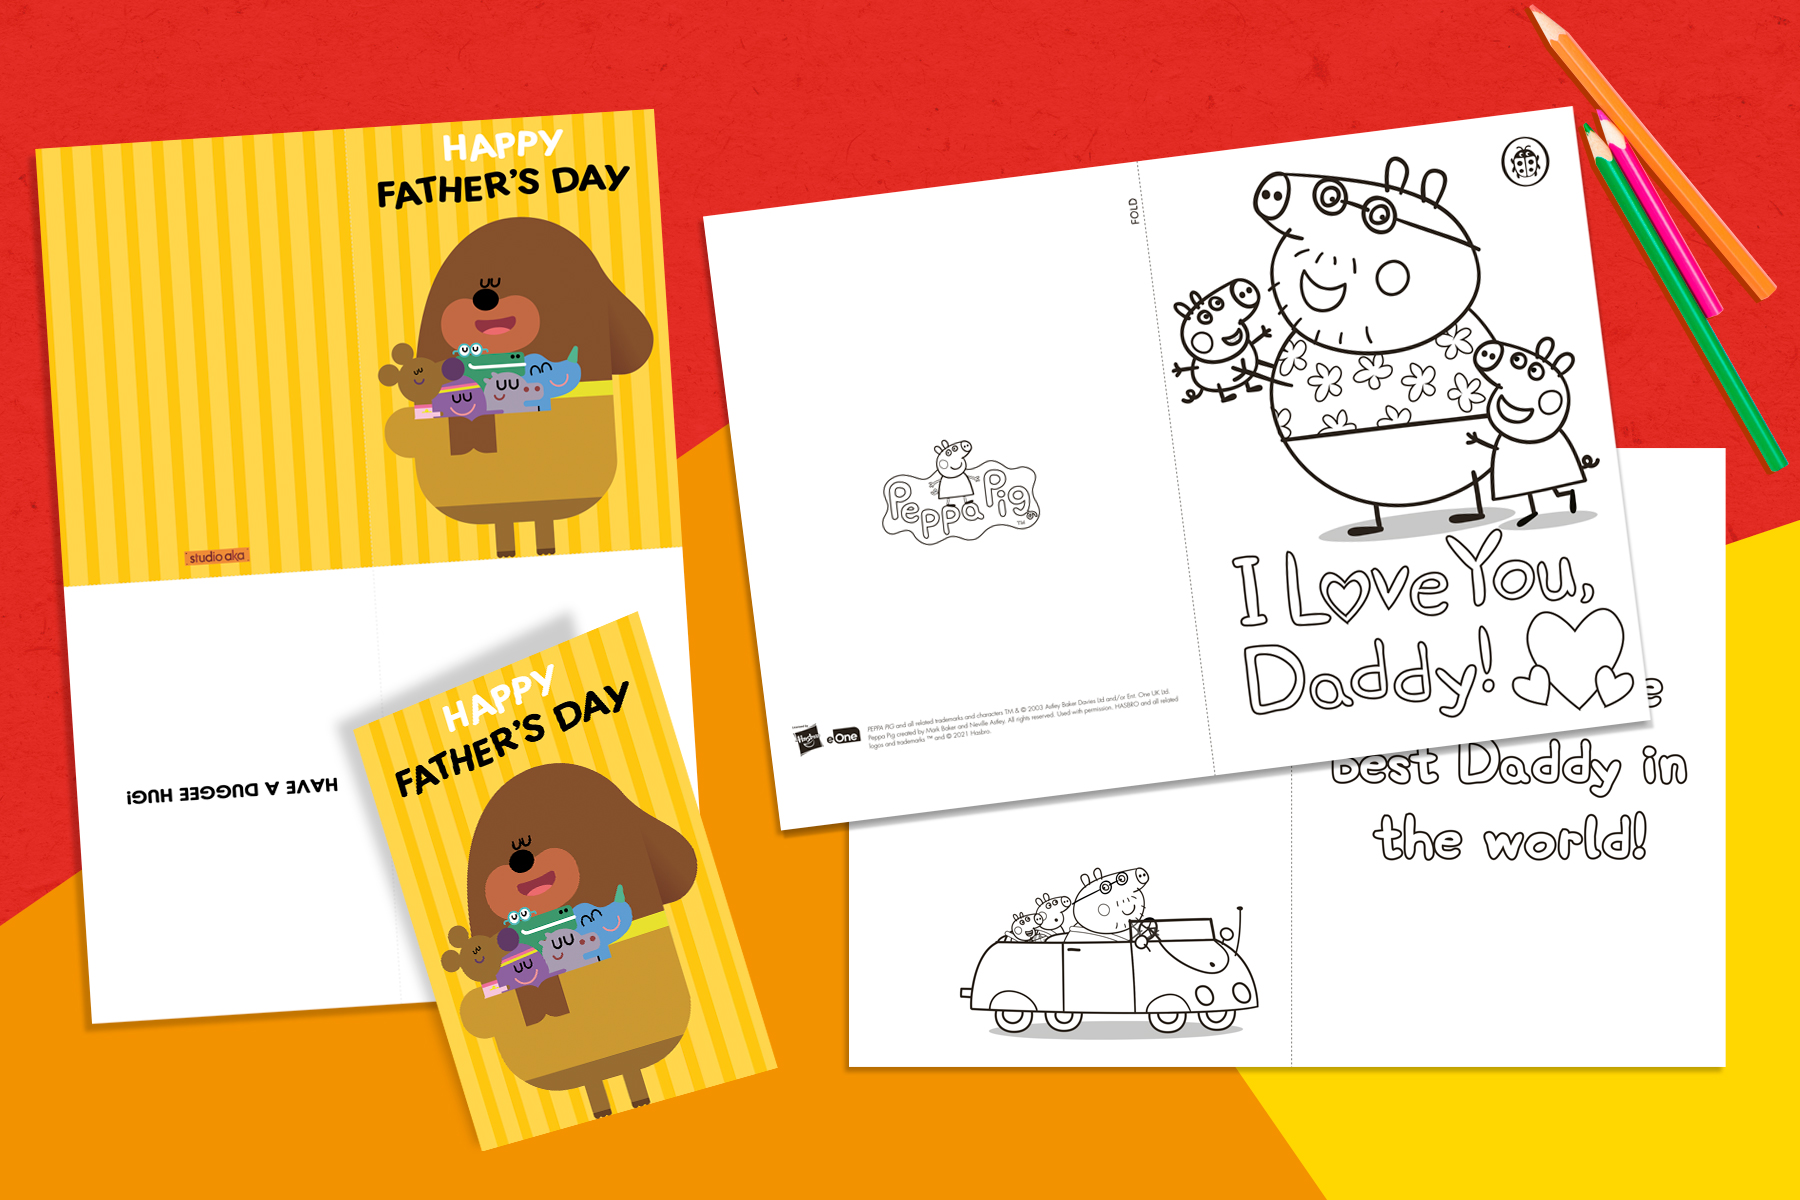 A picture of a Hey Duggee DIY Father's Day card and a Peppa Pig Father's Day card on a red, orange and yellow background